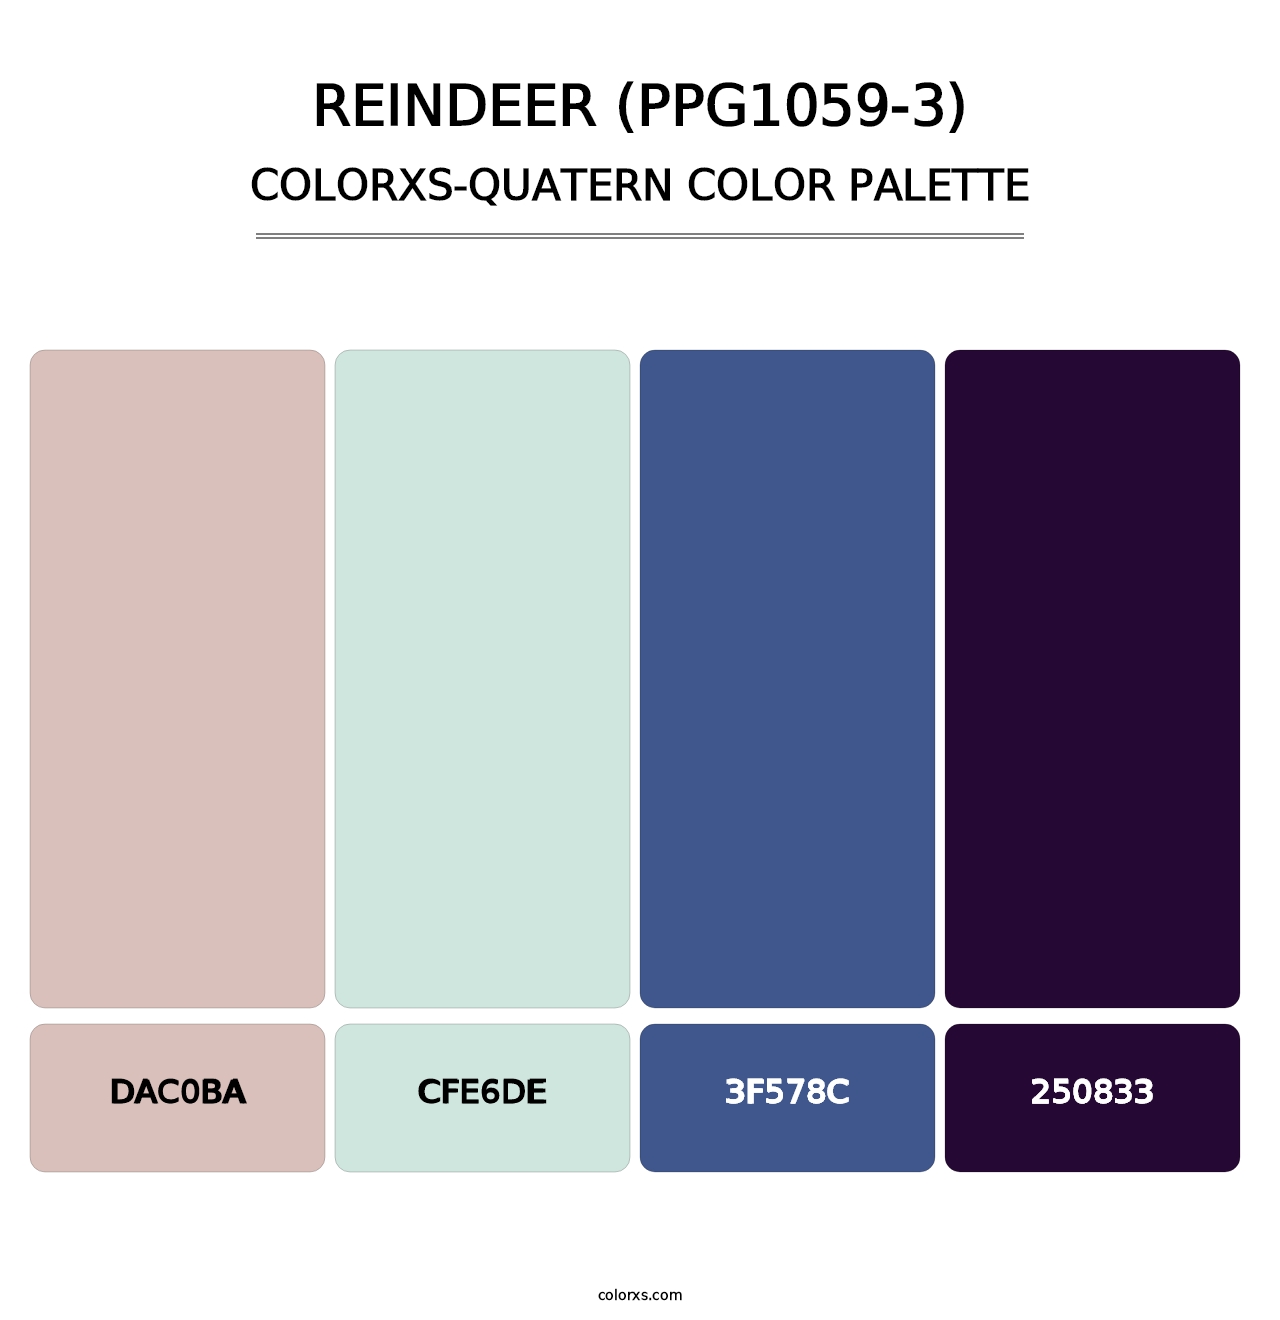 Reindeer (PPG1059-3) - Colorxs Quatern Palette